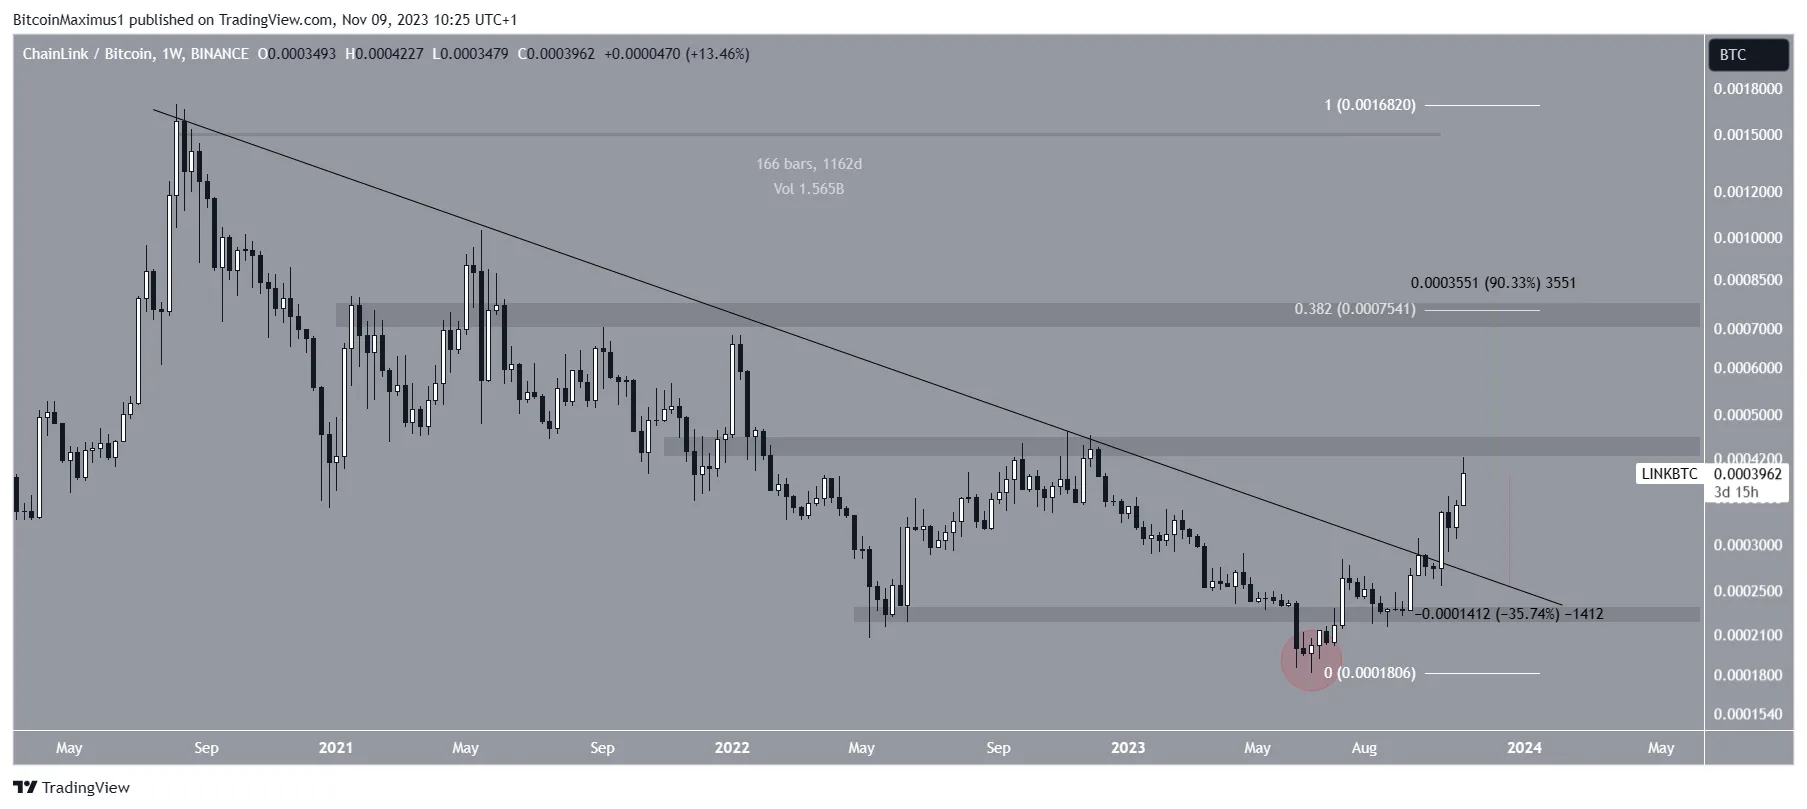 LINK/BTC Weekly Chart.